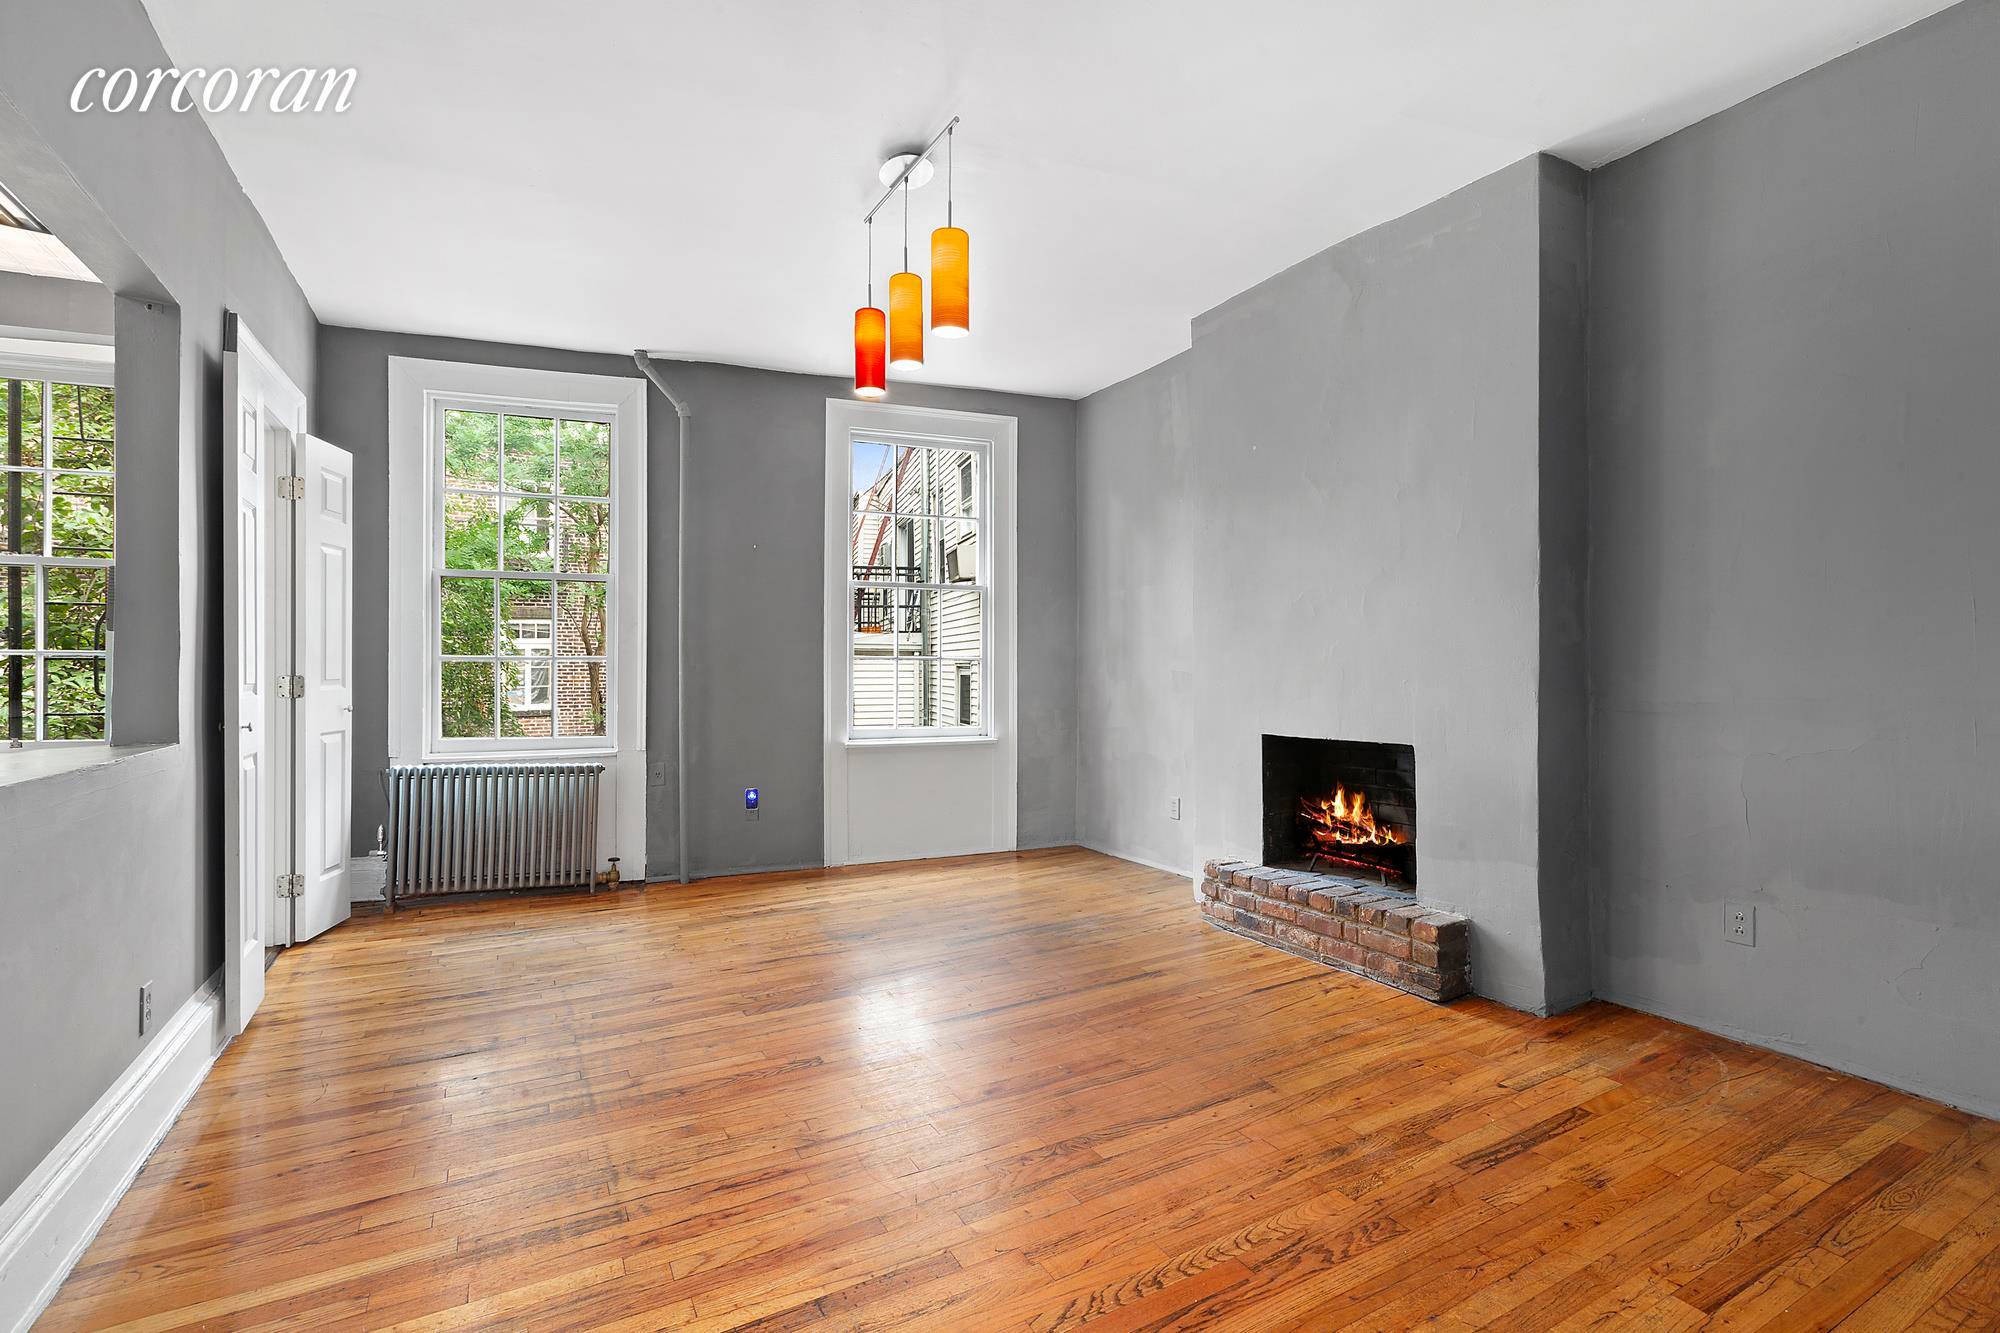 Offering 1 Month Free ! Net rent listed gross rent 11, 000 The townhouses of historic Patchin Place offers charm and character unlike any street in NYC.